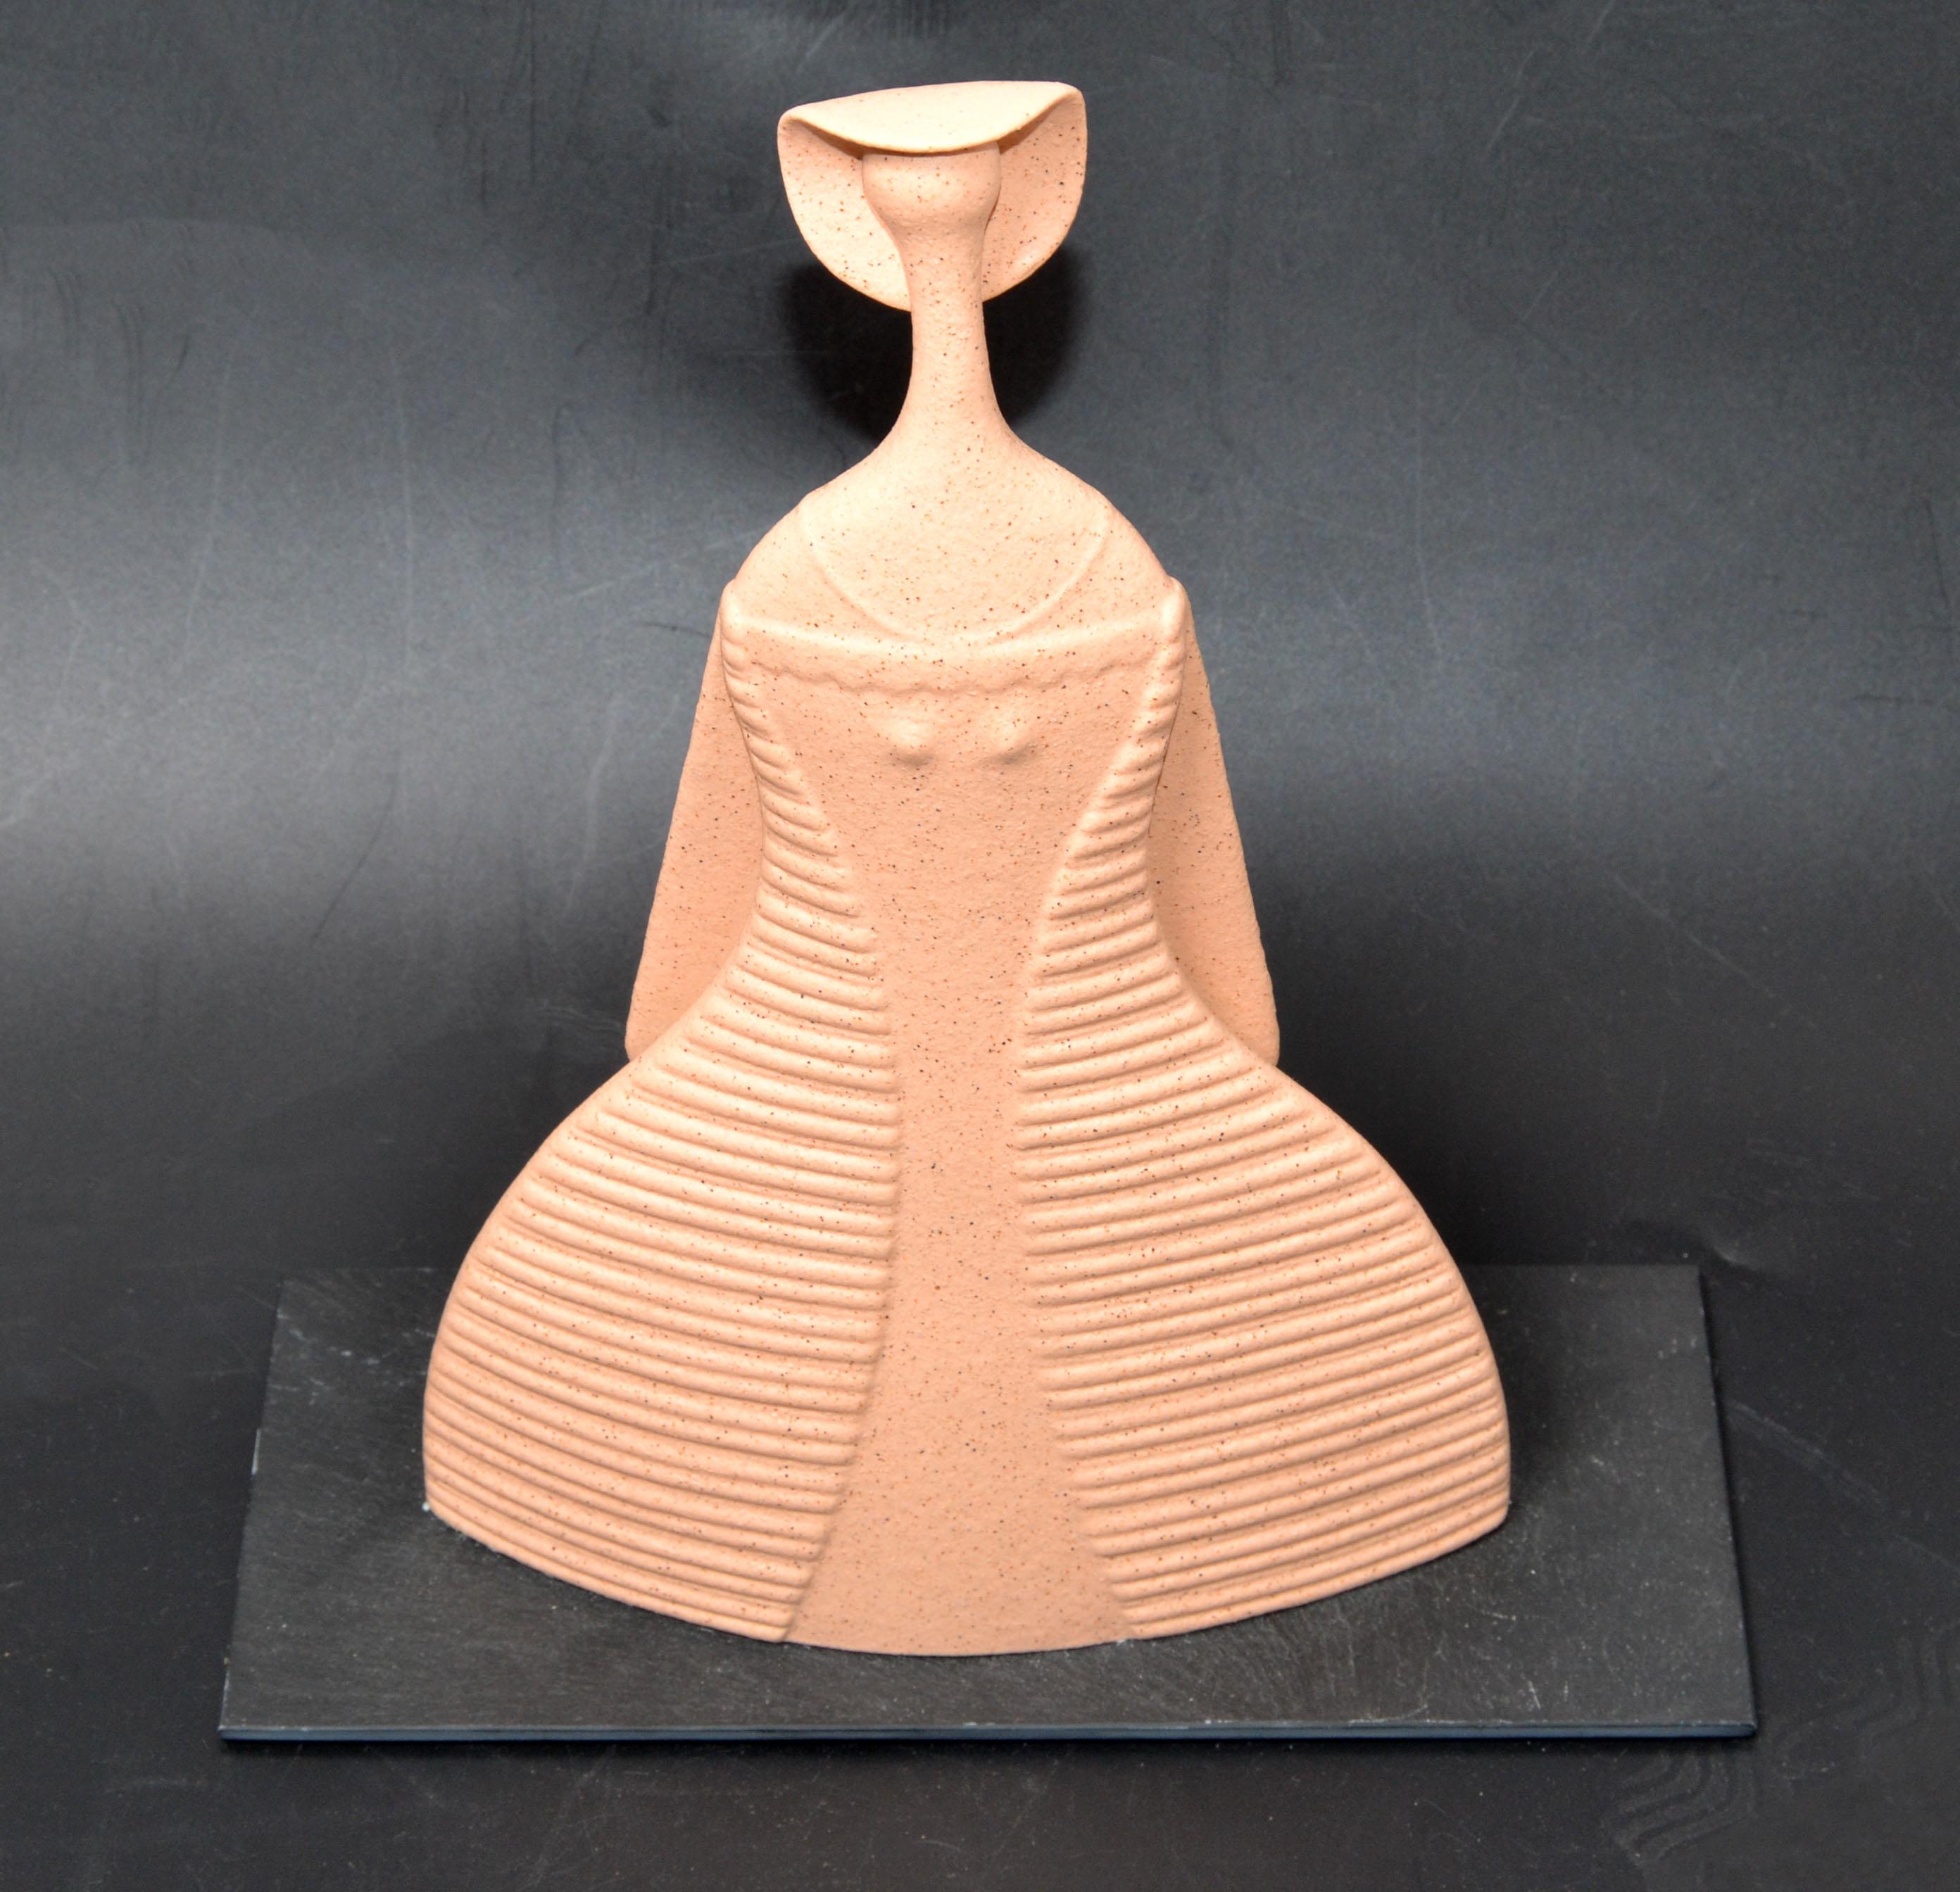 Lineasette Italy Vintage peach colored hand carved ceramic lady figurine or table sculpture Mid-Century Modern.
Figurative sculpture depicting a Lady with Hat in peach colored on black Slate Base.
Makers mark at the base of Sculpture, Made in Italy,